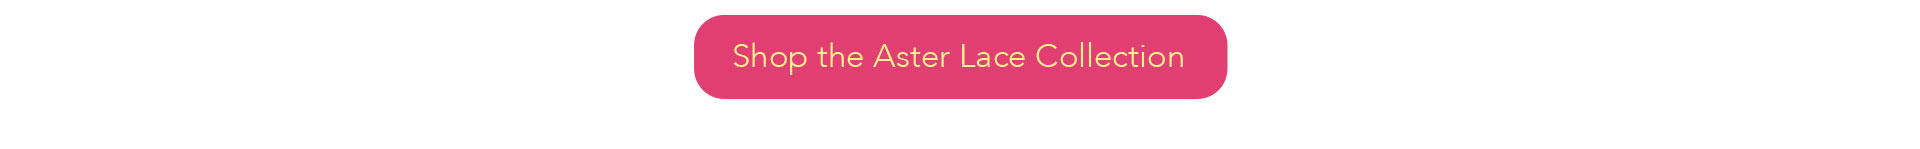 Shop the Aster Lace Collection